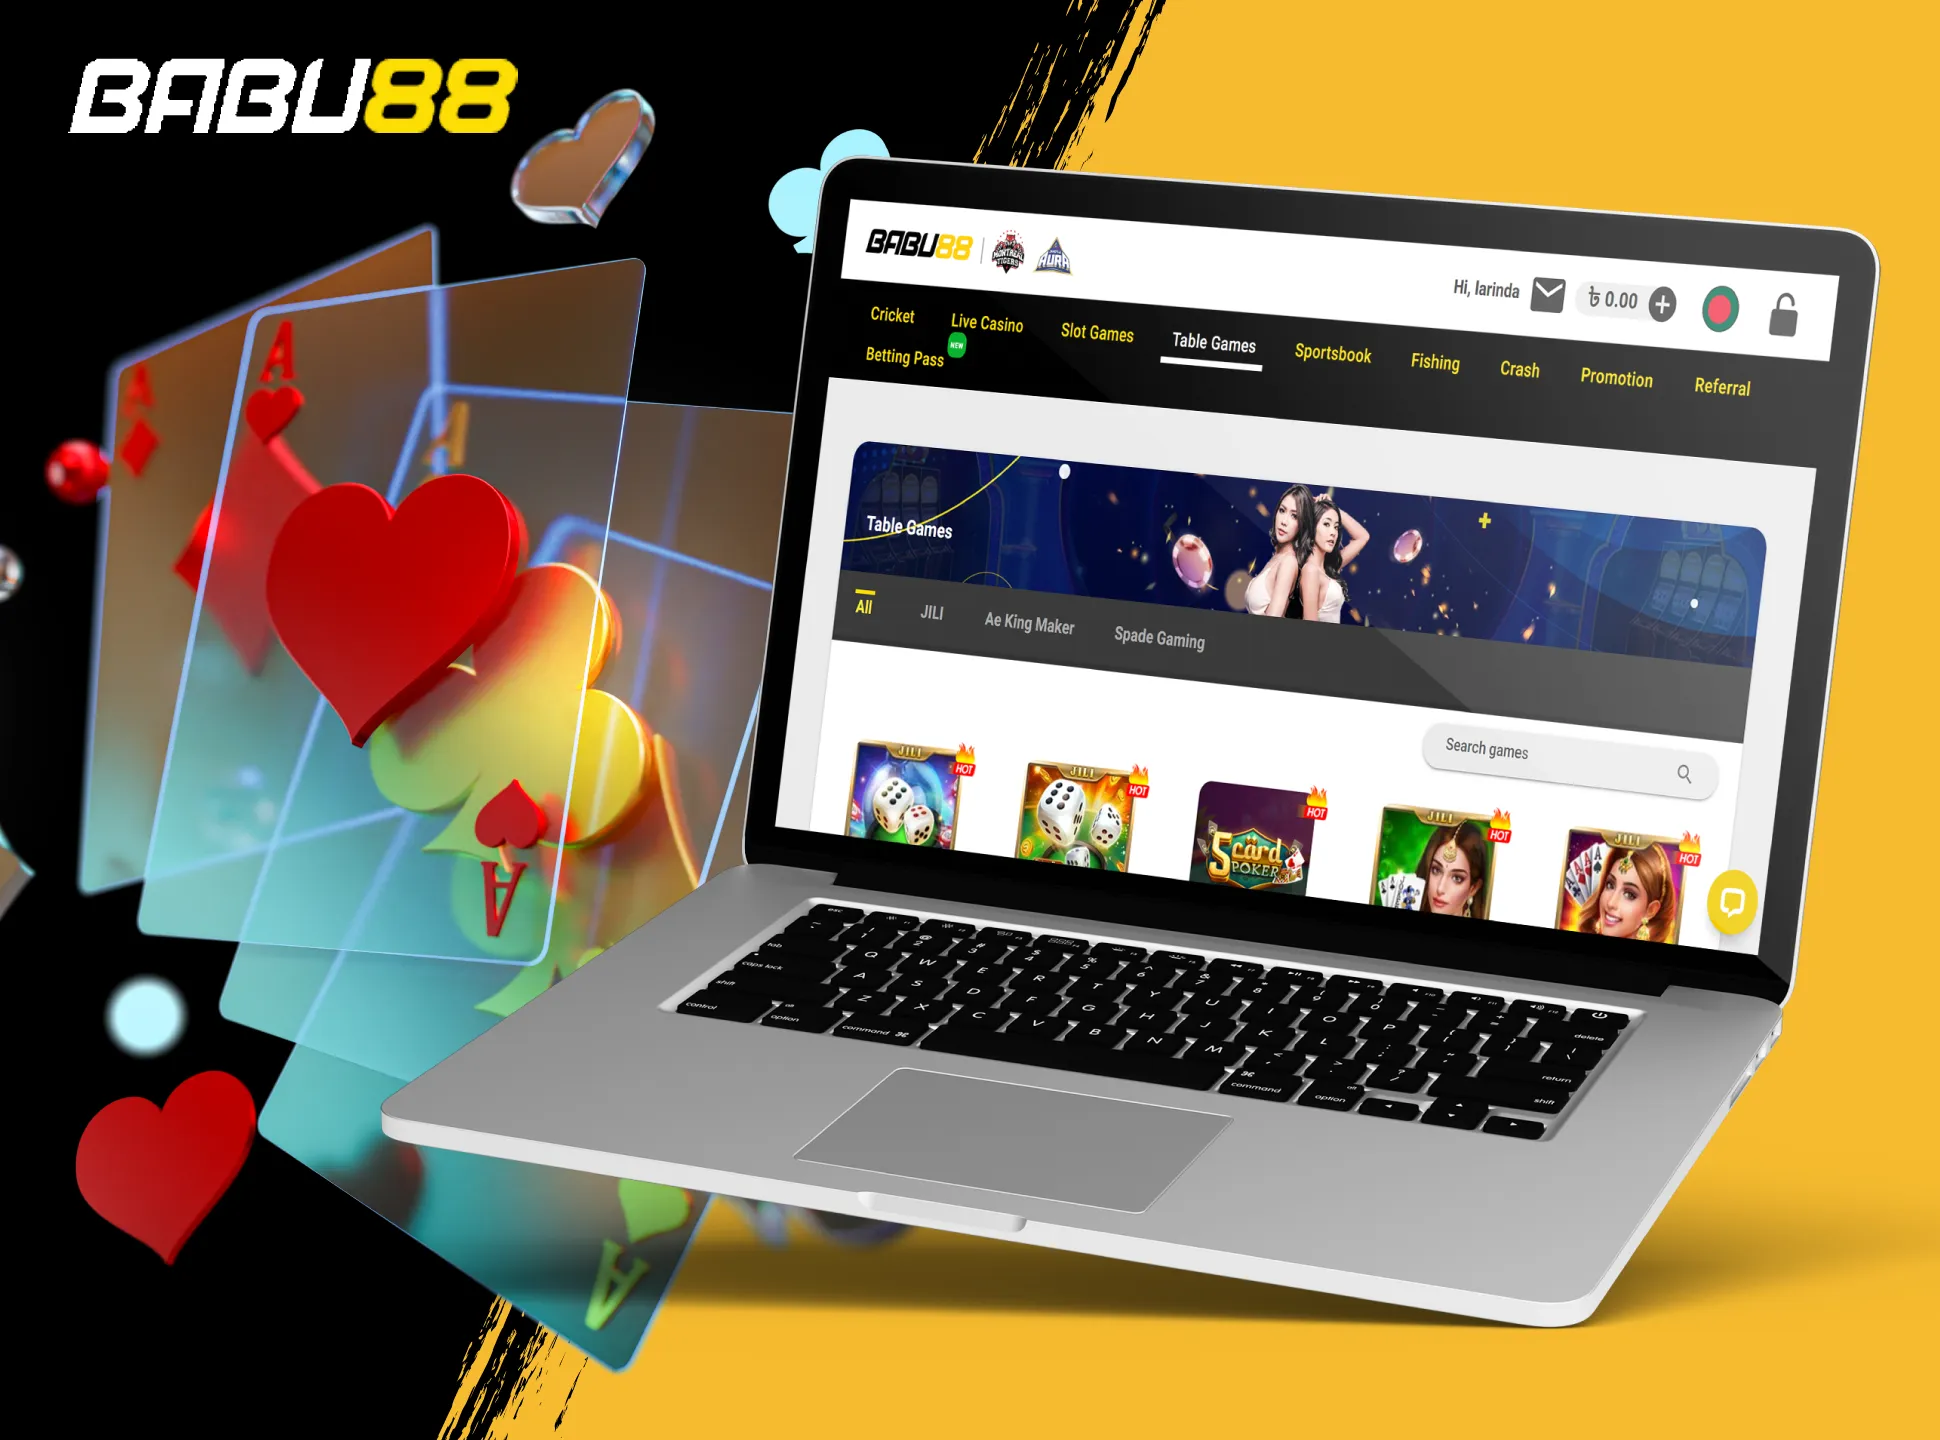 Play poker, baccarat, blackjack and other games in the Babu88 casino.